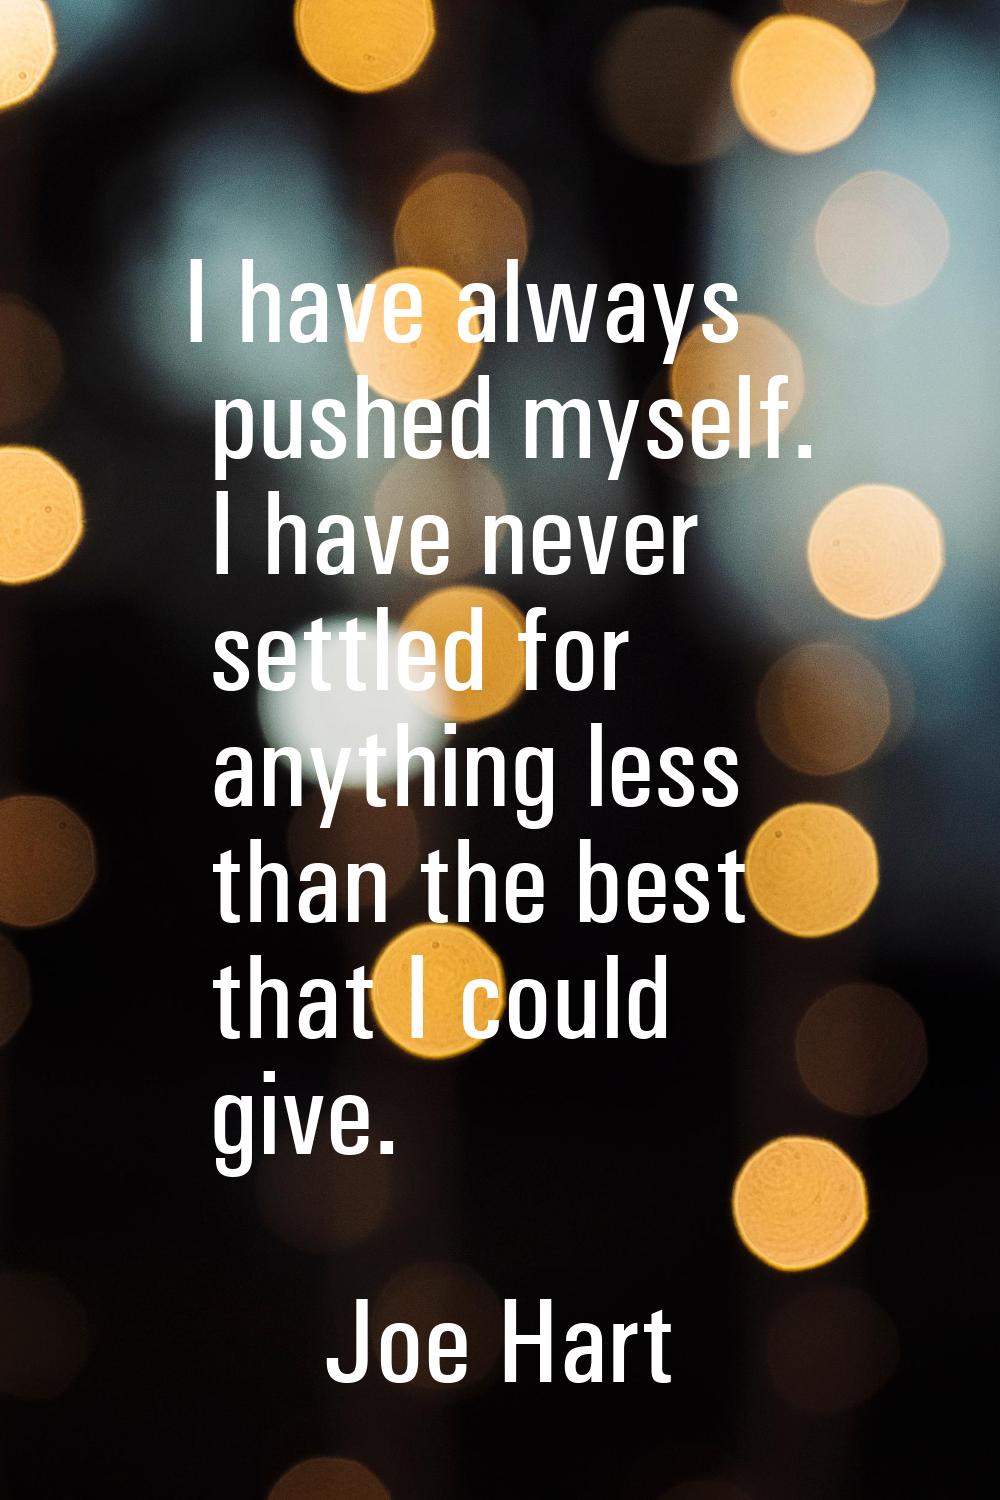 I have always pushed myself. I have never settled for anything less than the best that I could give